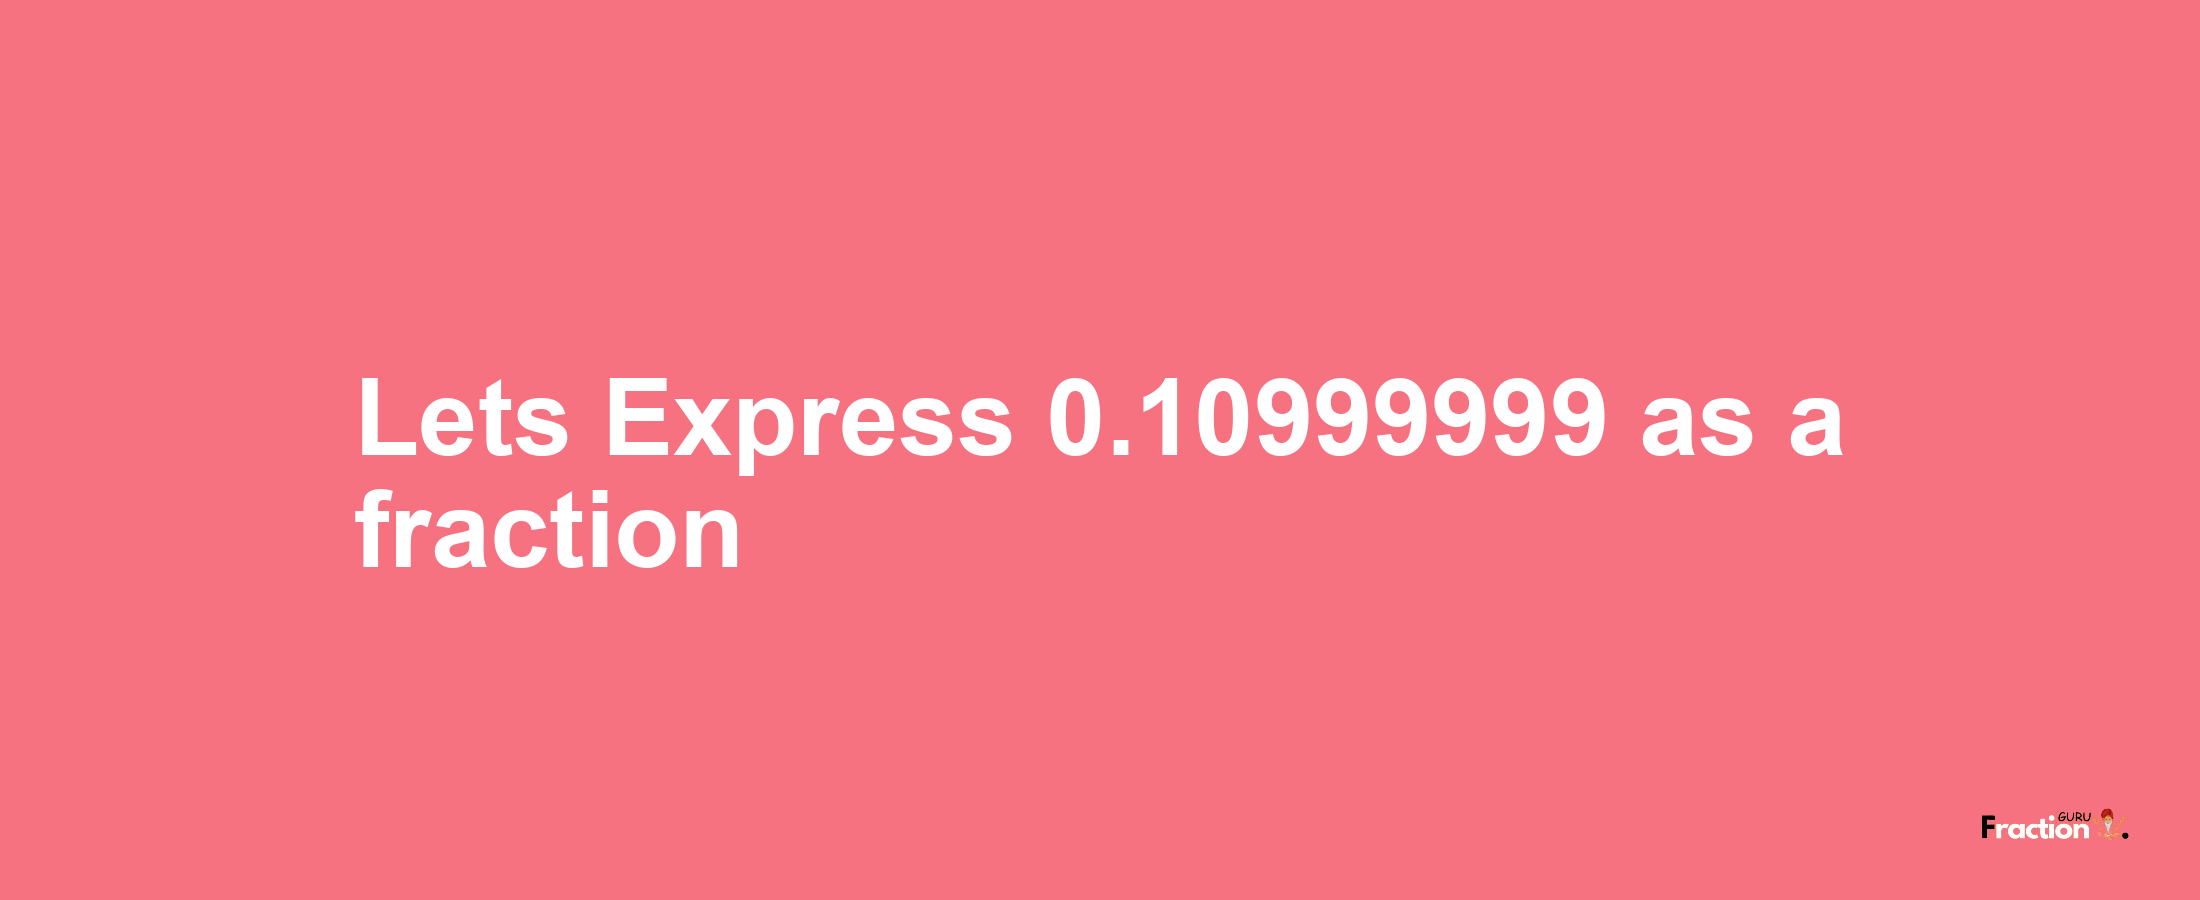 Lets Express 0.10999999 as afraction